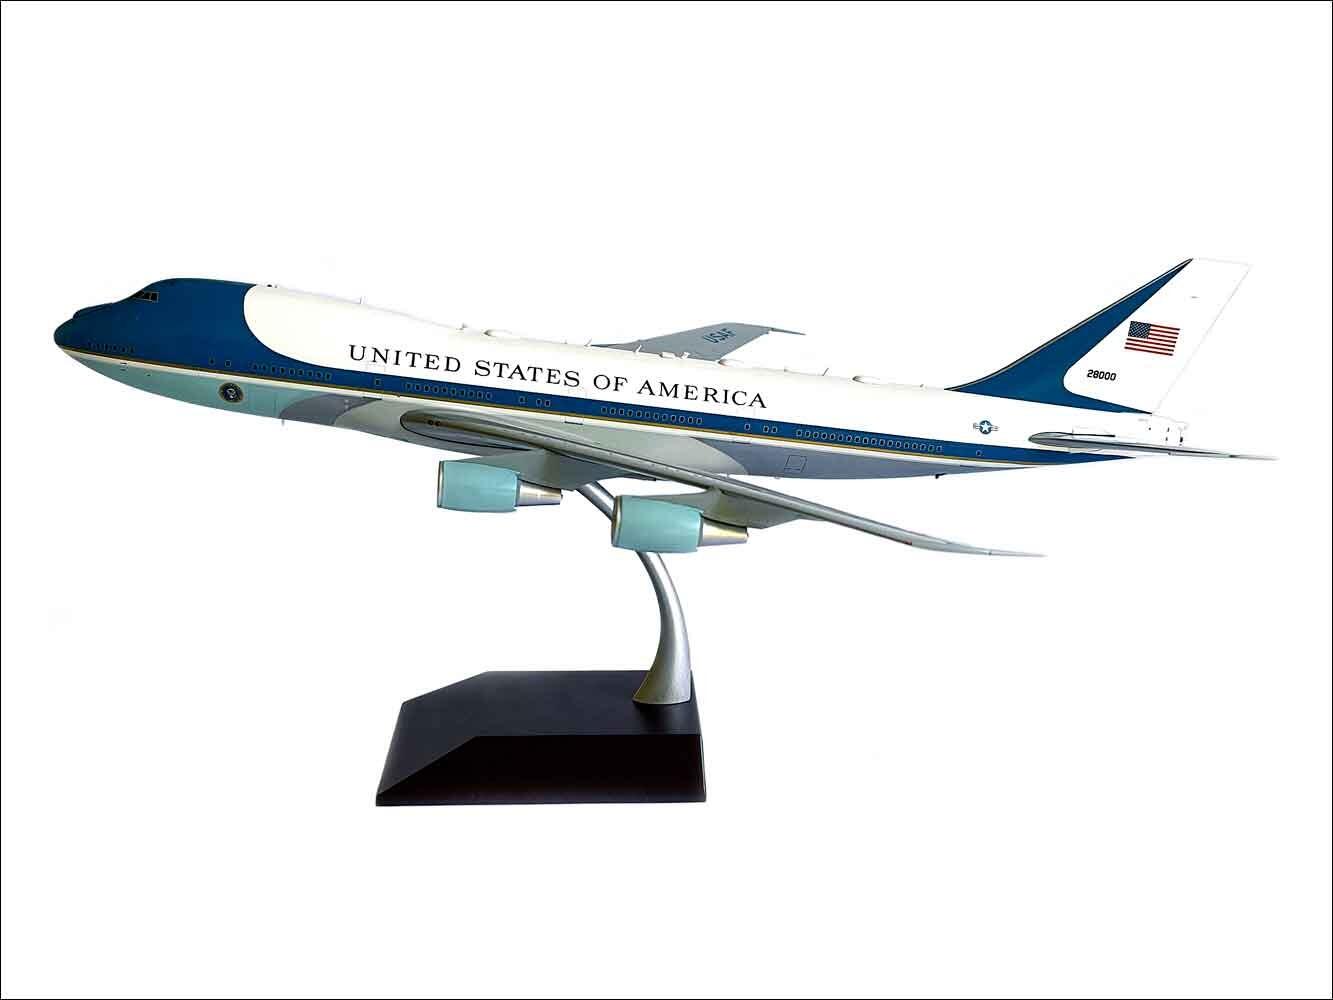 Air Force One USA | Boeing 747 Airplane Model 1:200